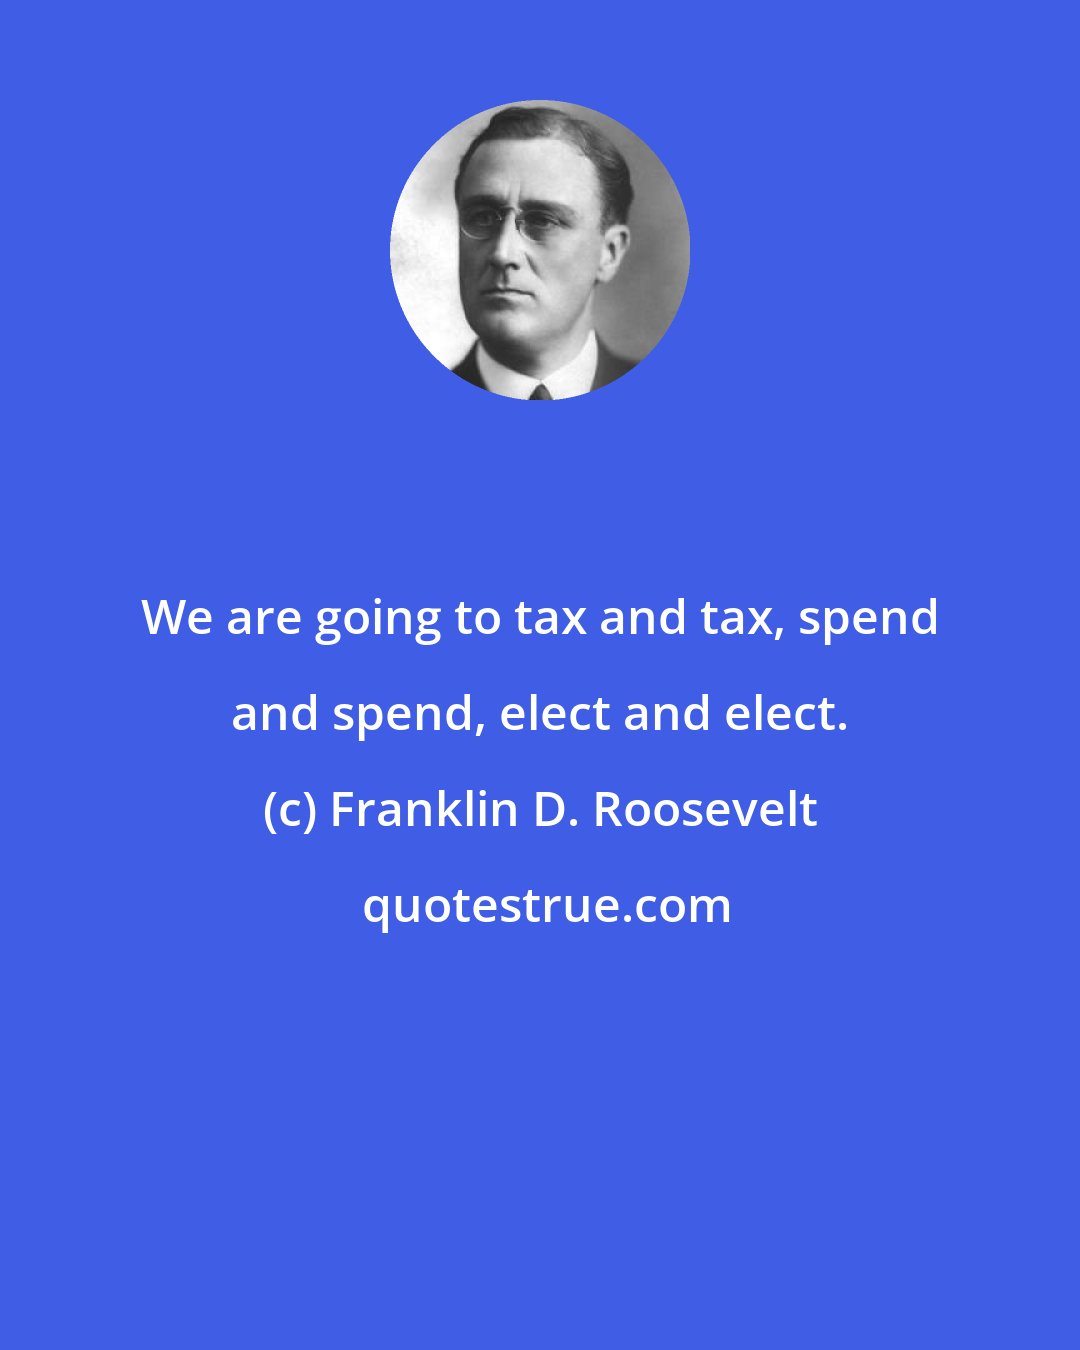 Franklin D. Roosevelt: We are going to tax and tax, spend and spend, elect and elect.